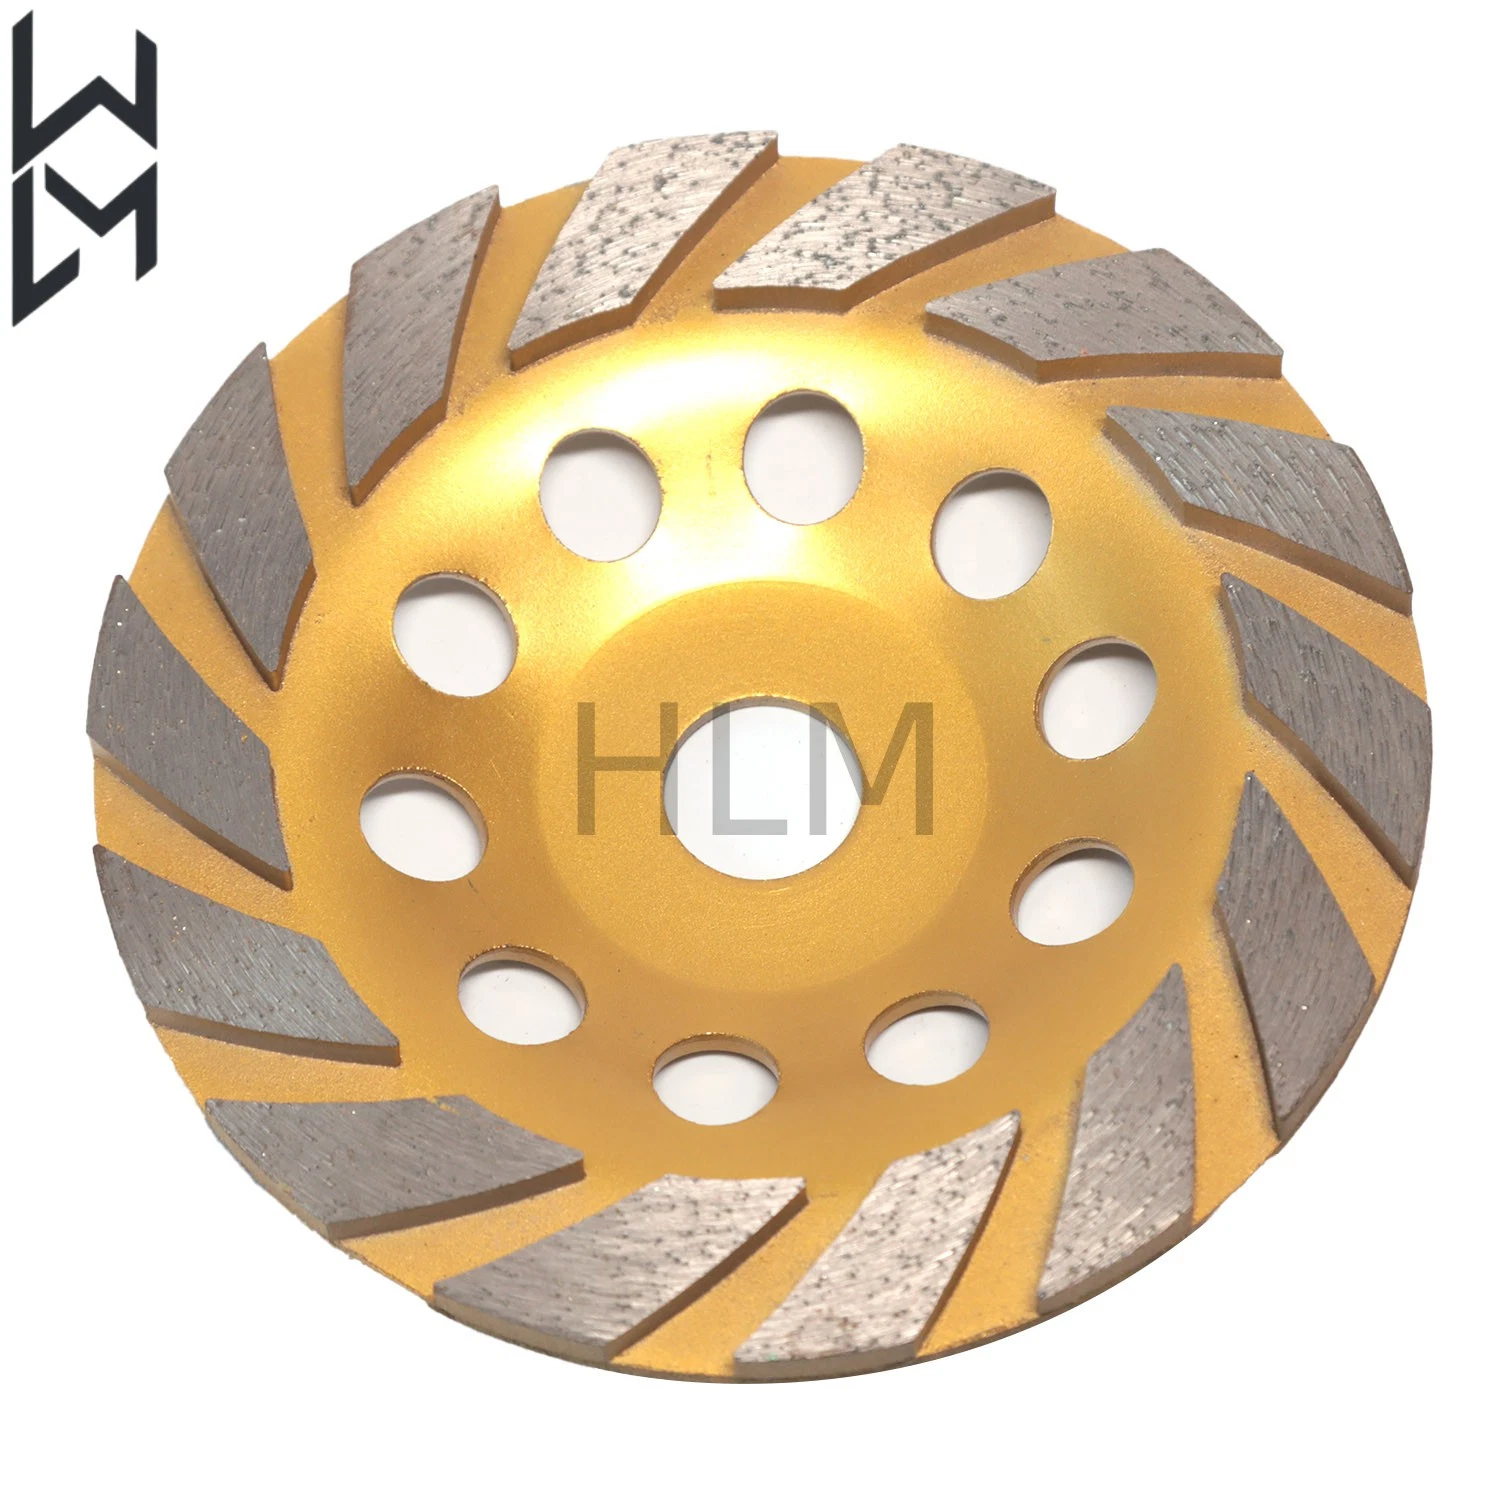 80mm Diamond Grinding Wheels for Cement Stone Concrete Bowl Grinding Discs